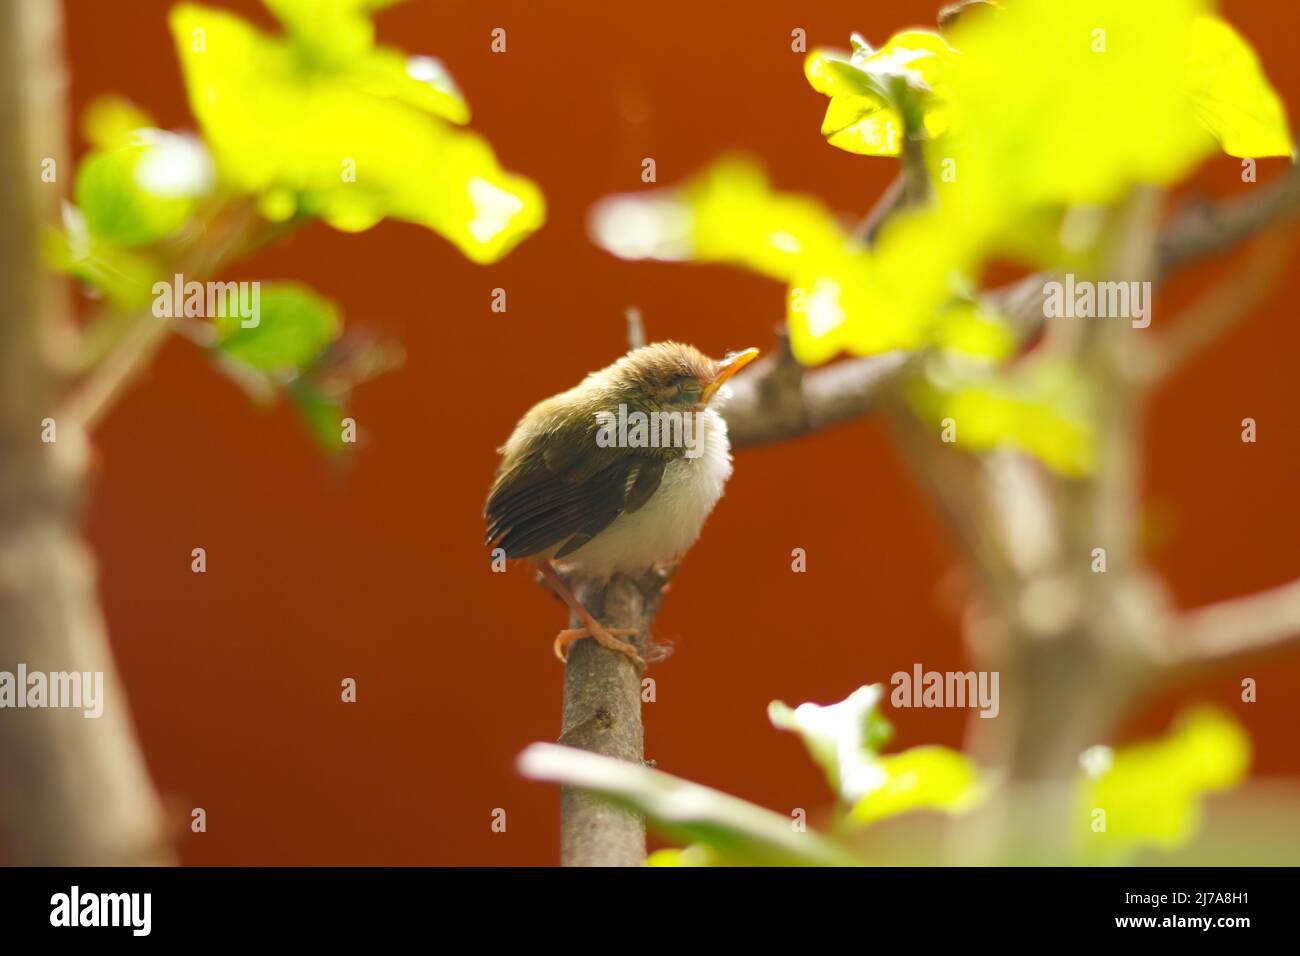 Sleepy Baby Tailor-bird sitting on the branches with swallow blur Stock Photo